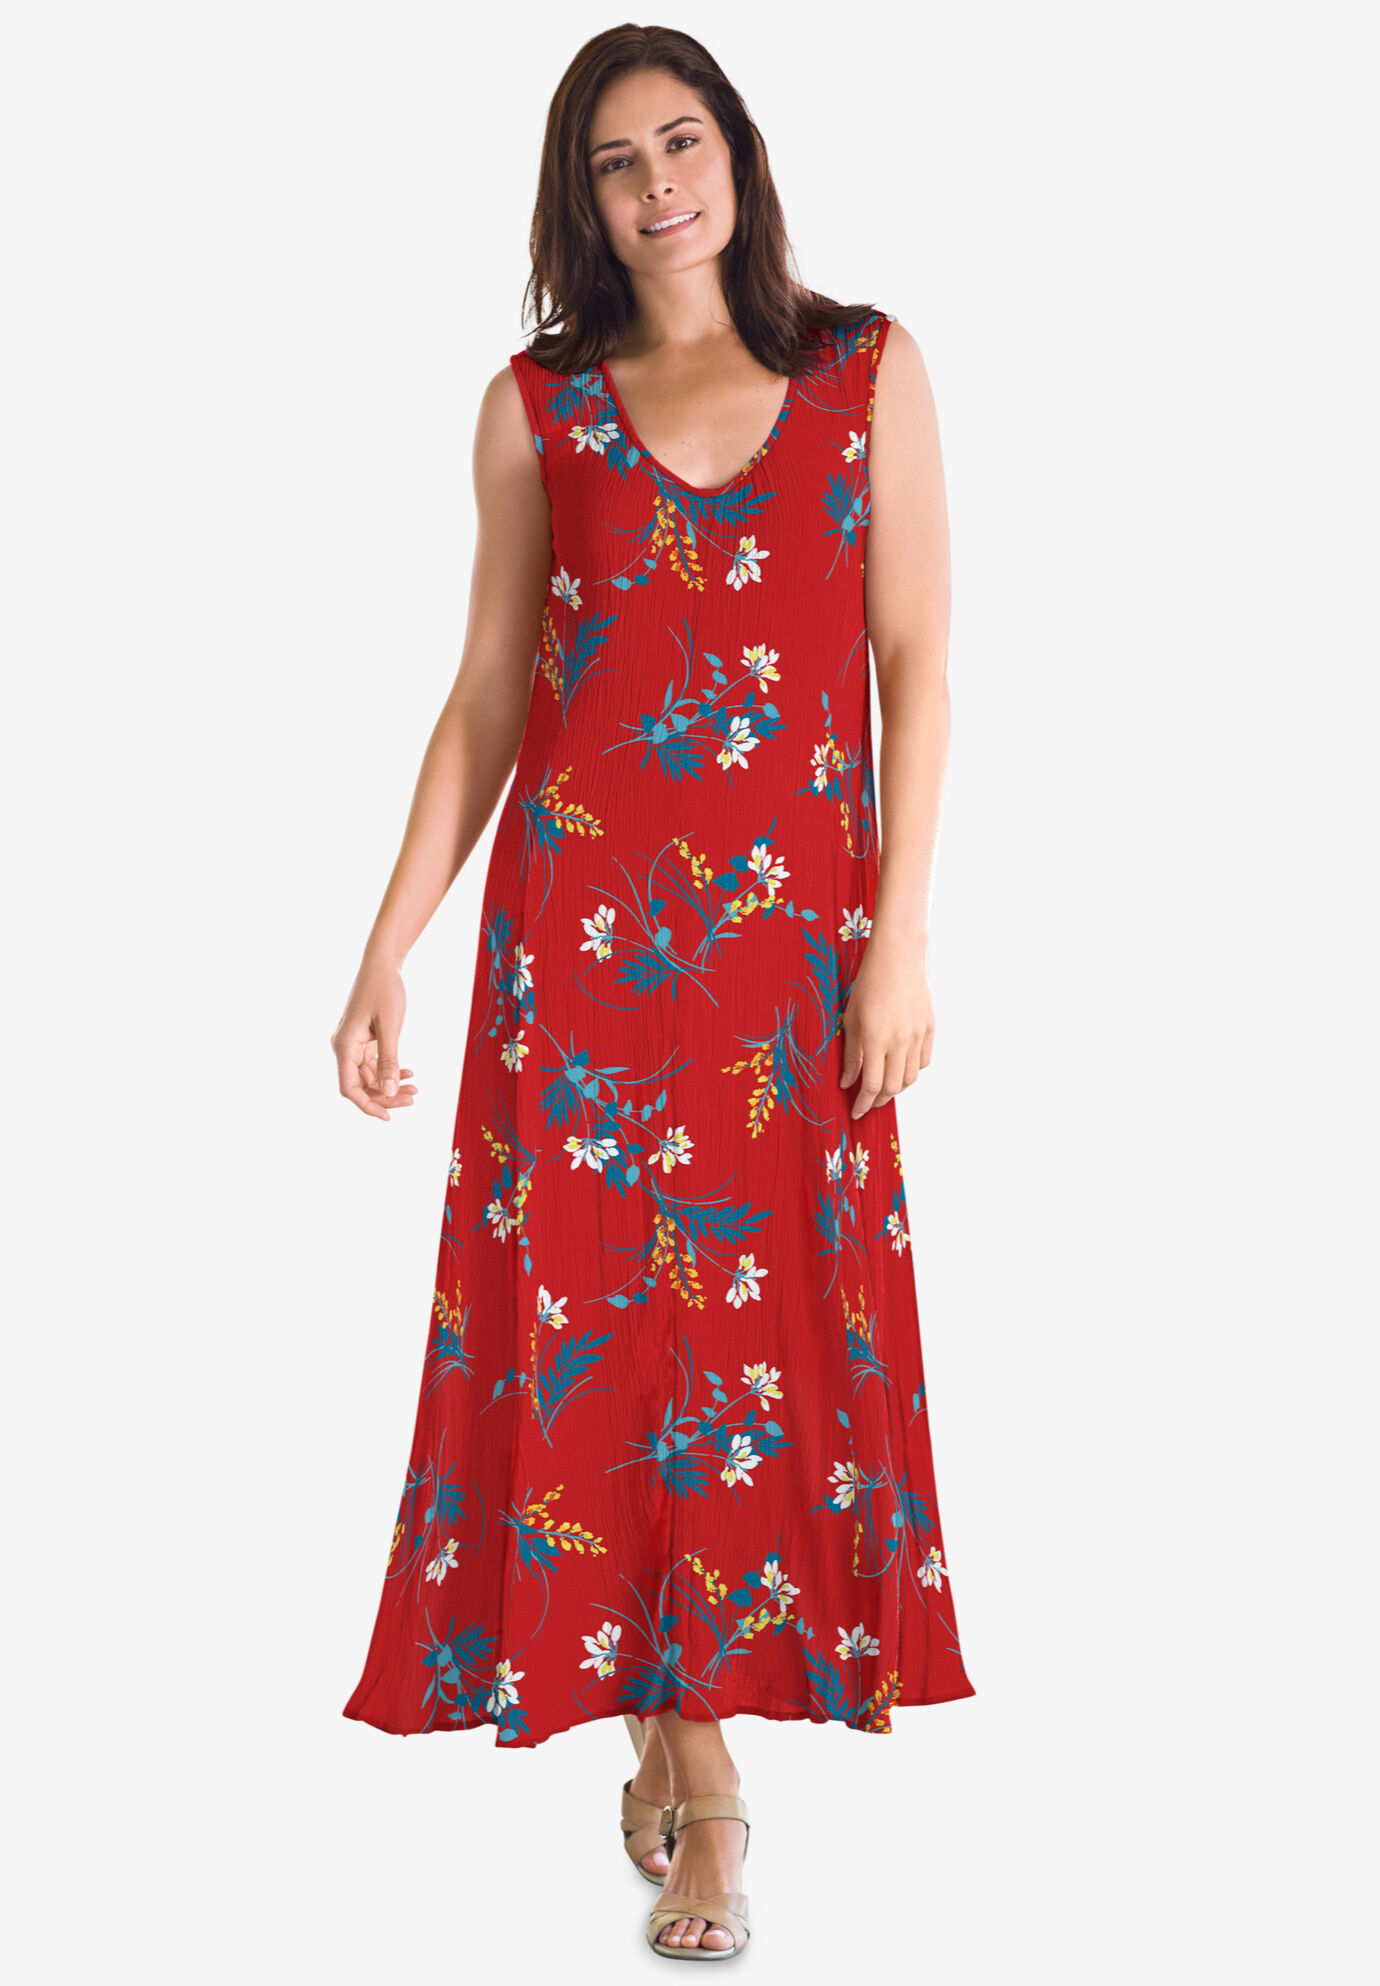 Clearance Plus Size Dresses | Woman Within